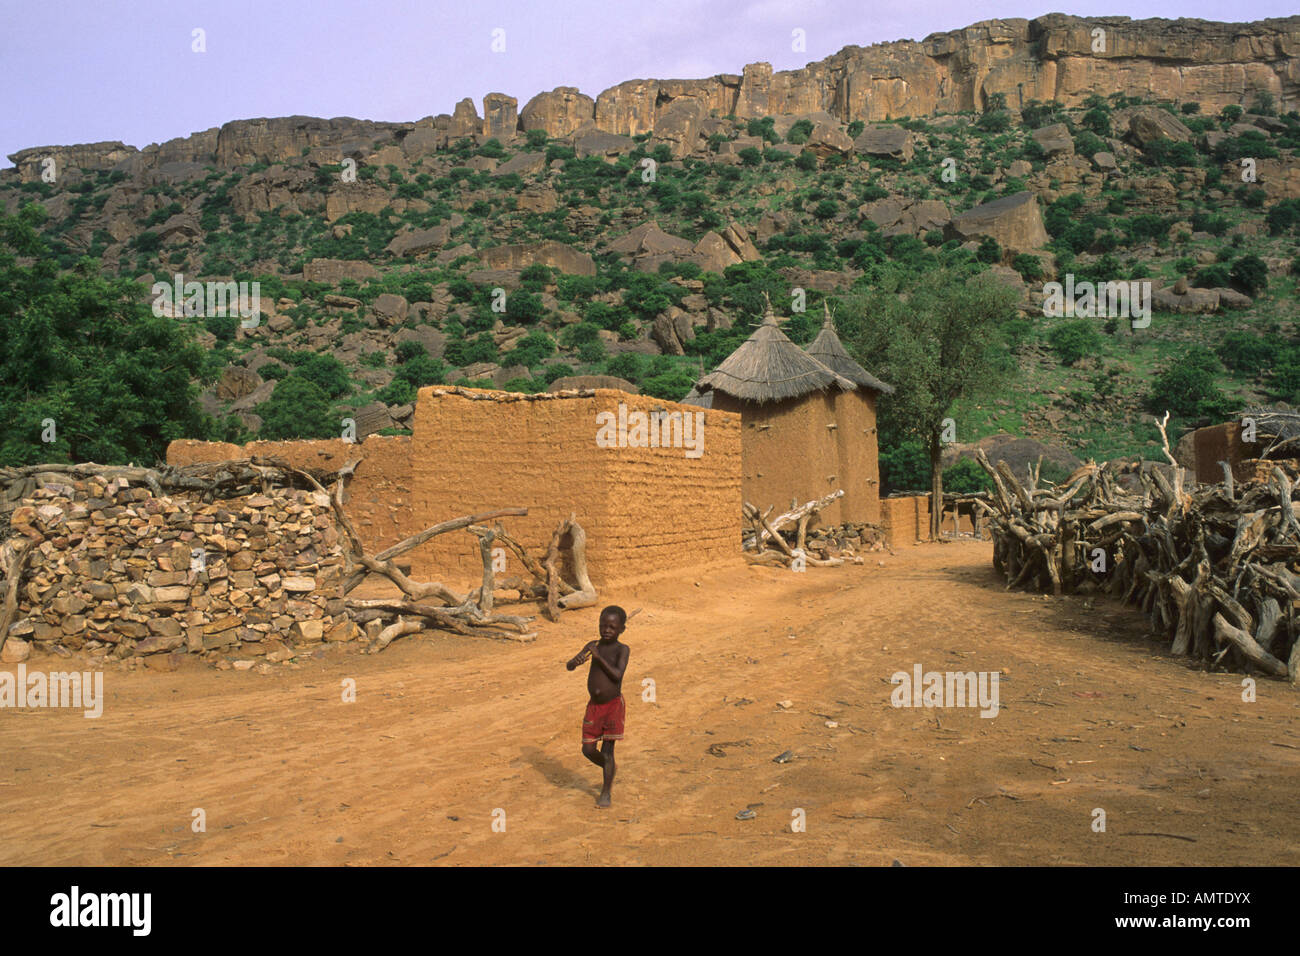 Small boy walking along a dusty road in a Dogon village with the Bandiagra escarpment in the background Stock Photo